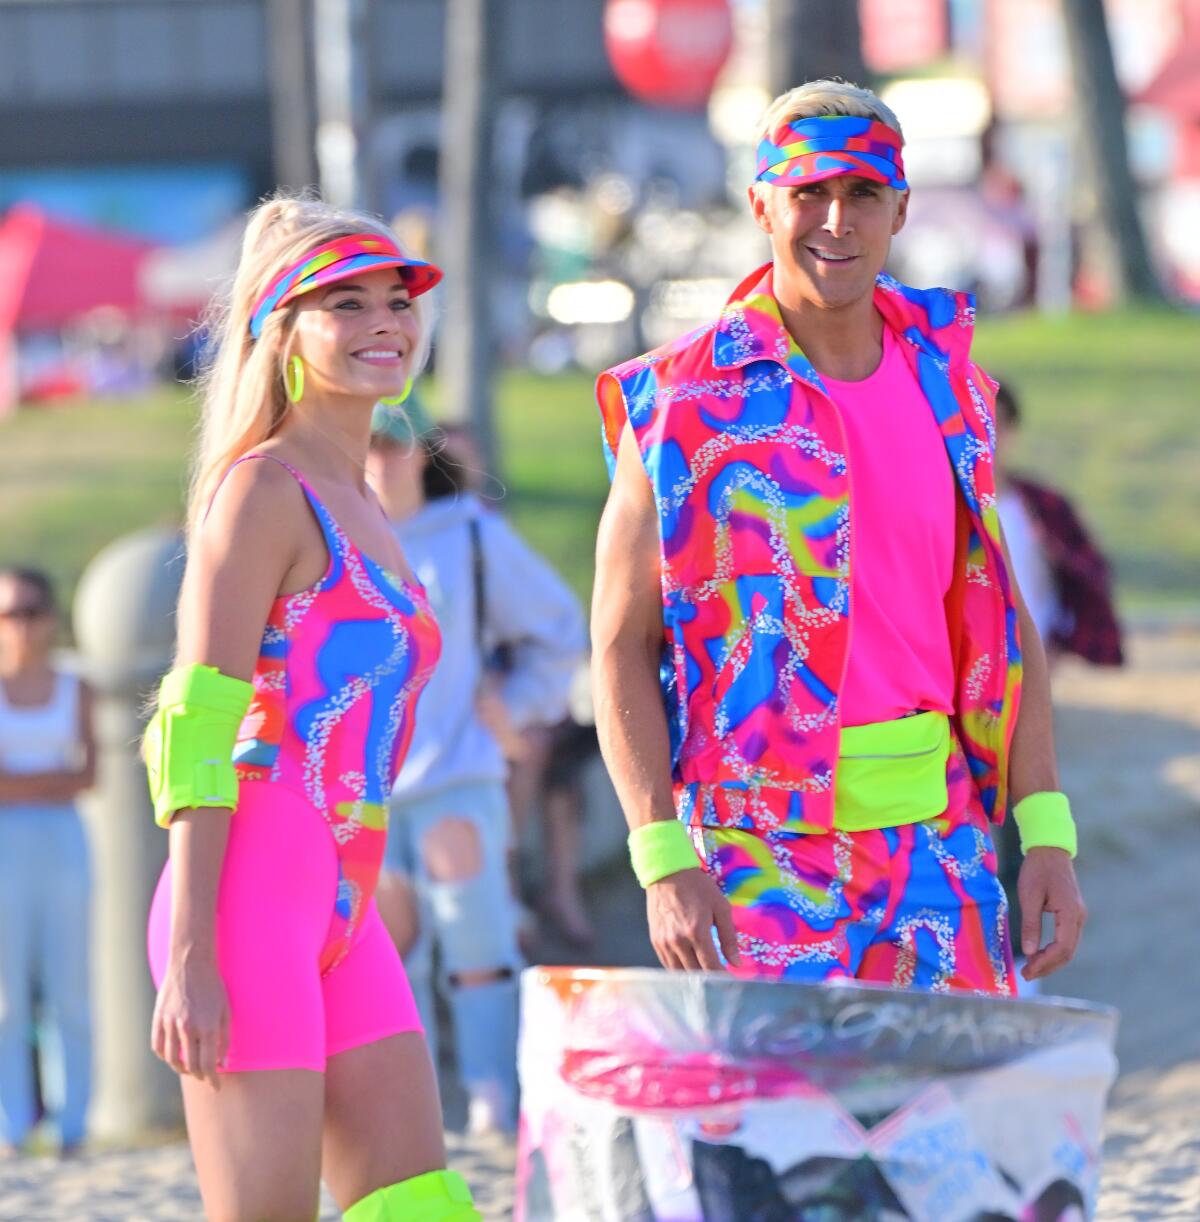 A woman and man wear matching neon-colored outfits at Venice Beach.